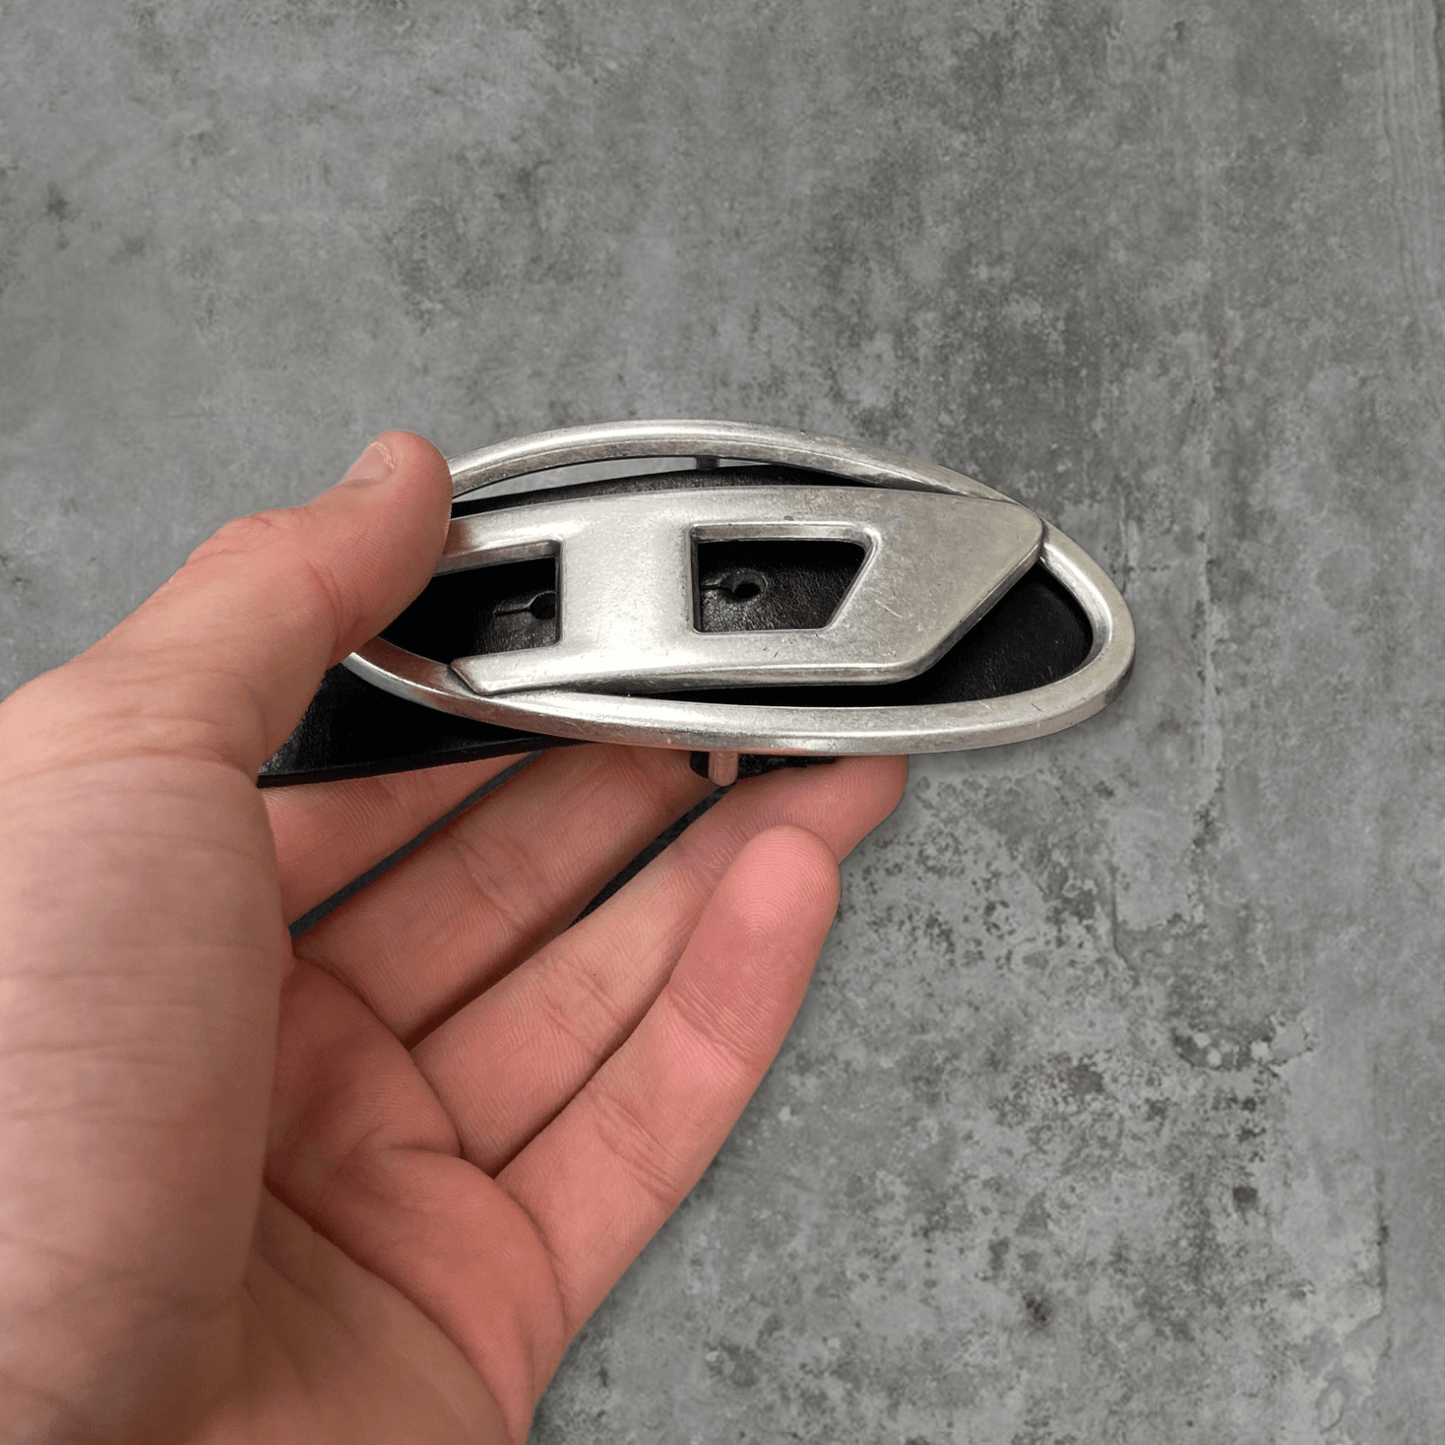 DIESEL "D" LEATHER AND CHROME BELT - Known Source